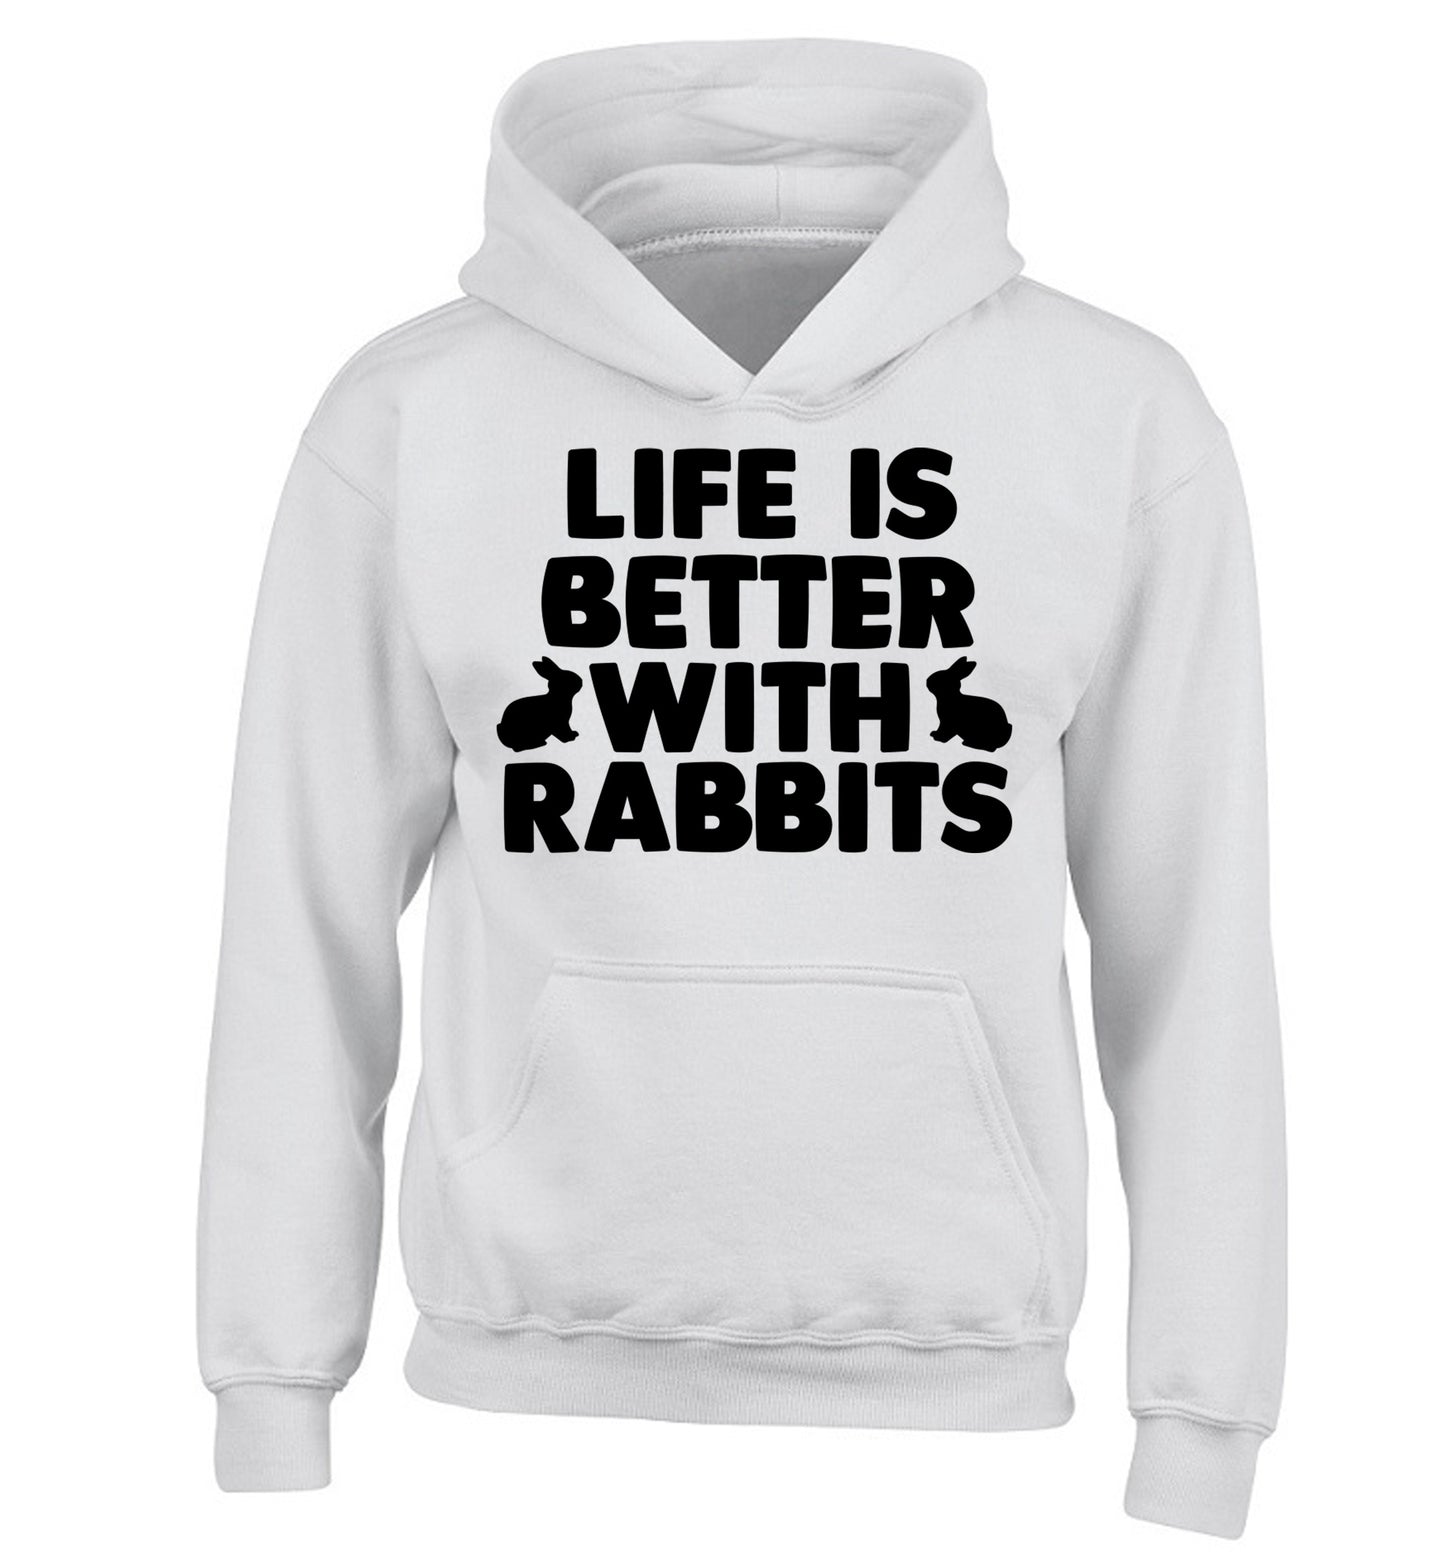 Life is better with rabbits children's white hoodie 12-14 Years